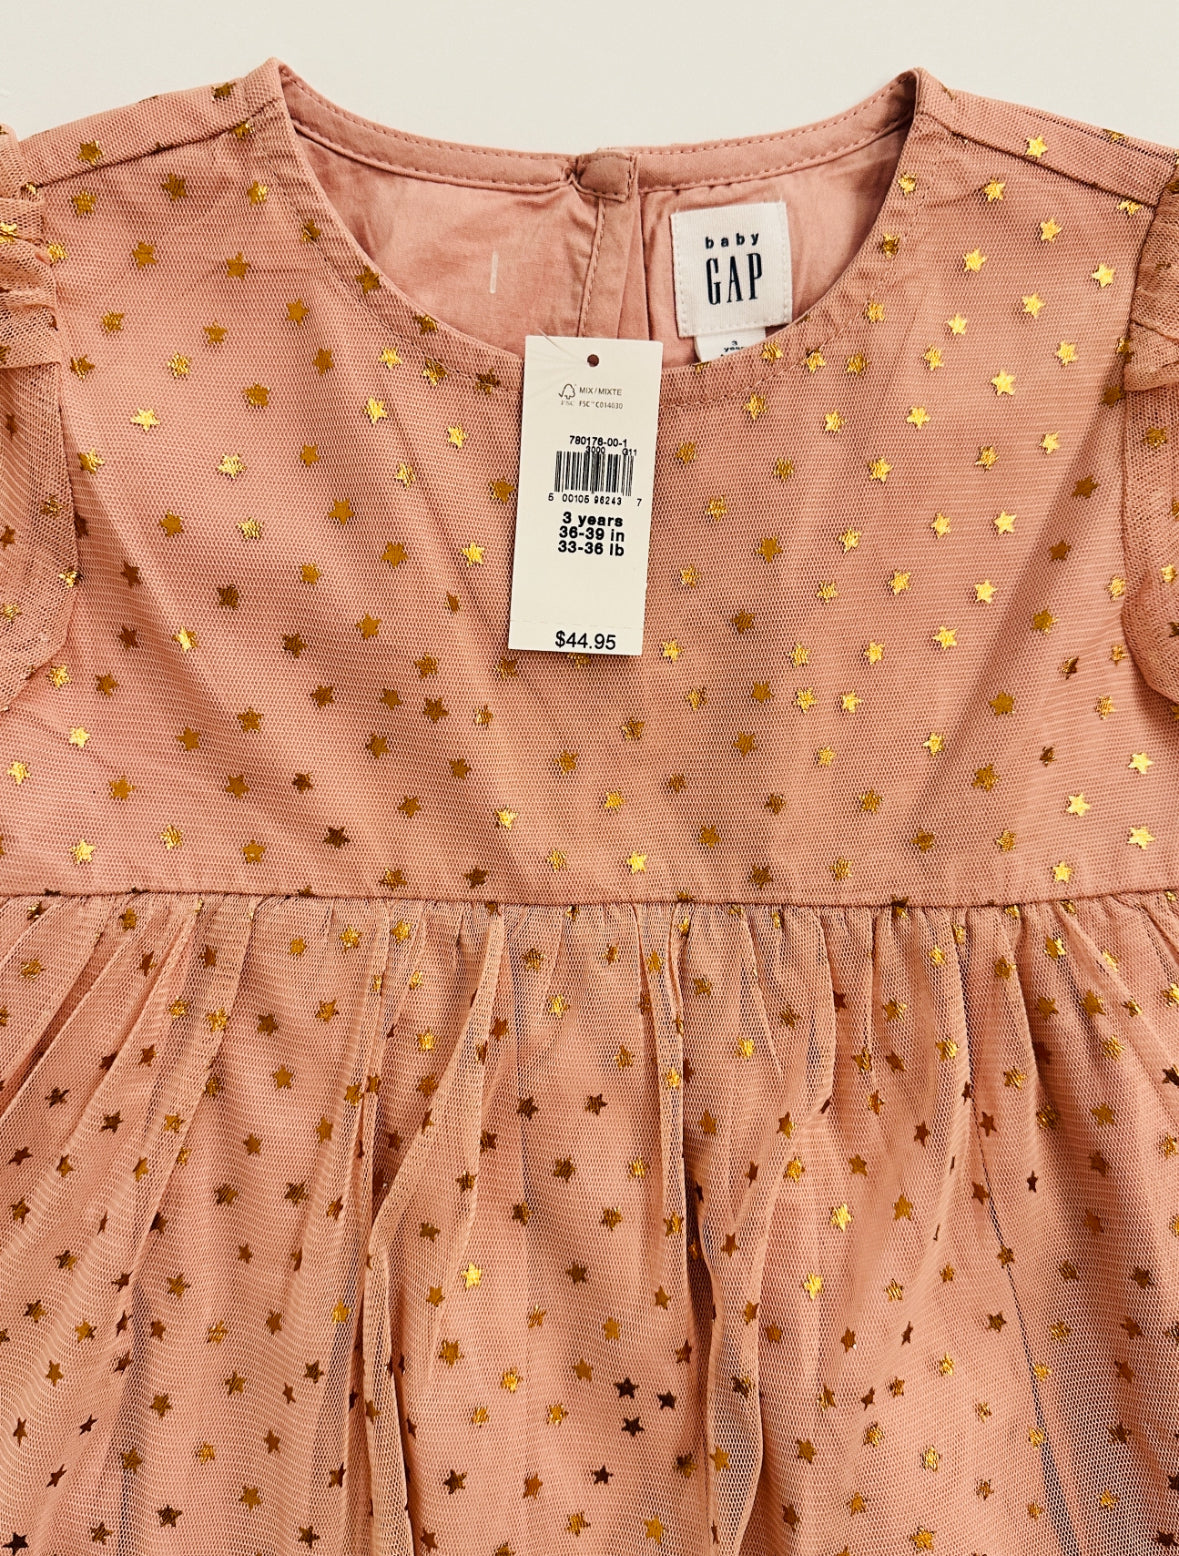 **REDUCED** GAP | 3t | NWT | pink&gold